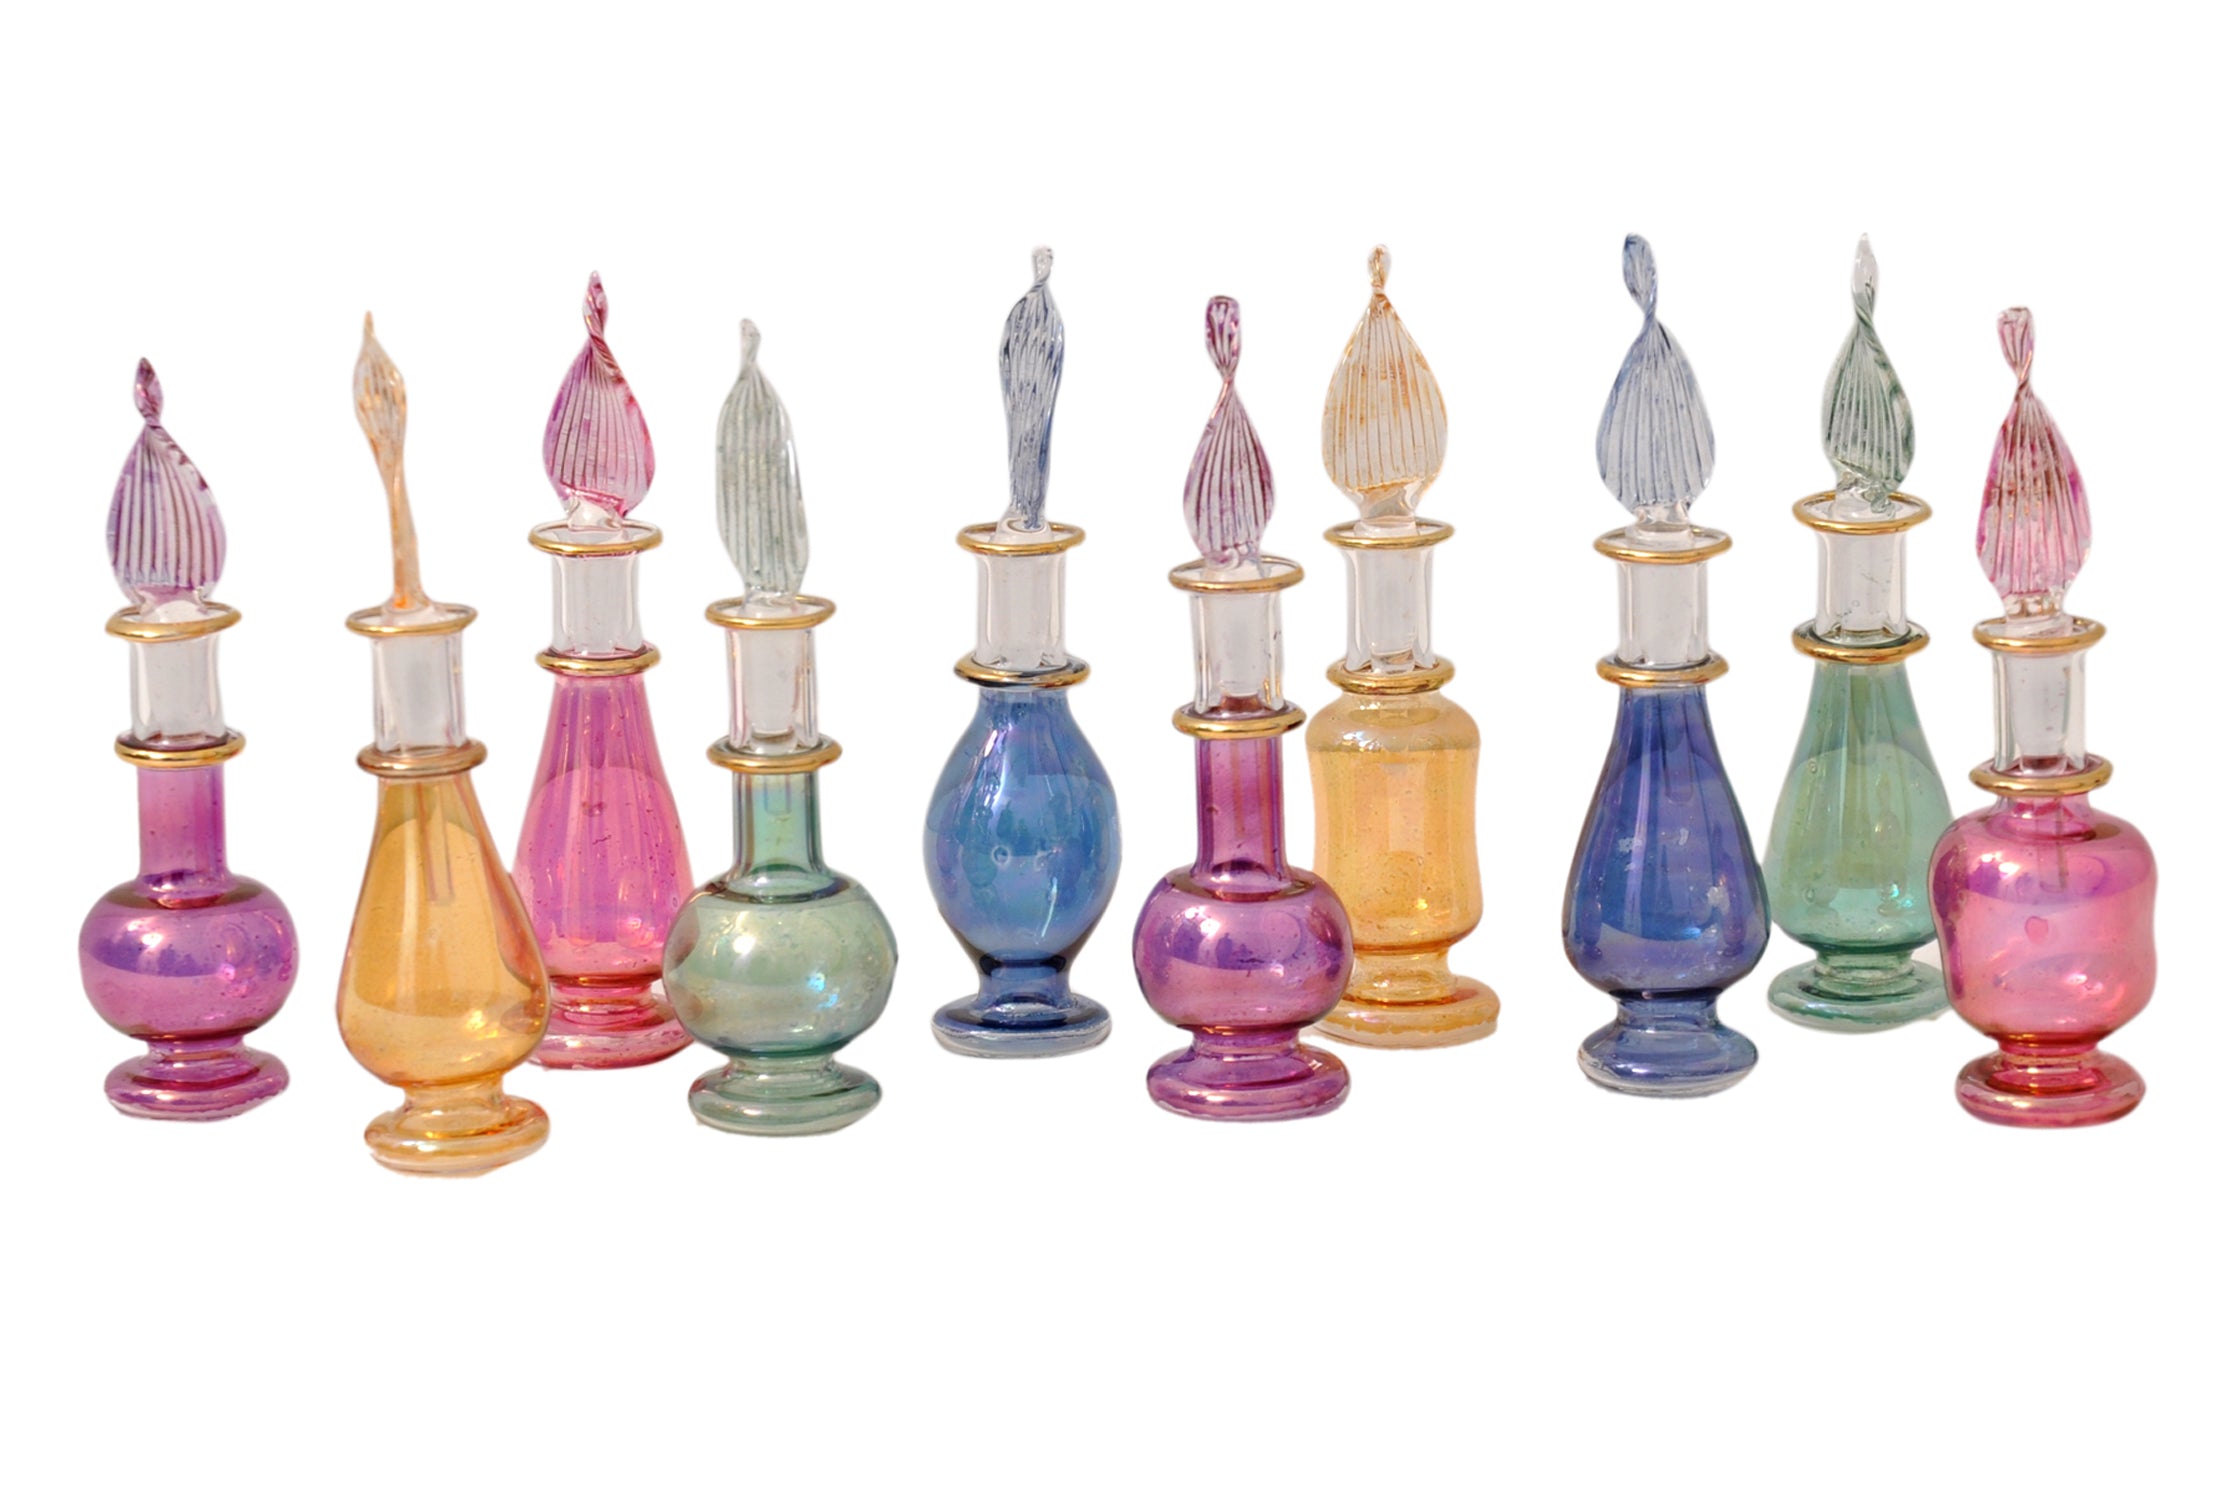 Egyptian perfume bottles Set of 10 hand Blown Decorative Pyrex Glass Vials Height 2 Inch (5 cm) by CraftsOfEgypt